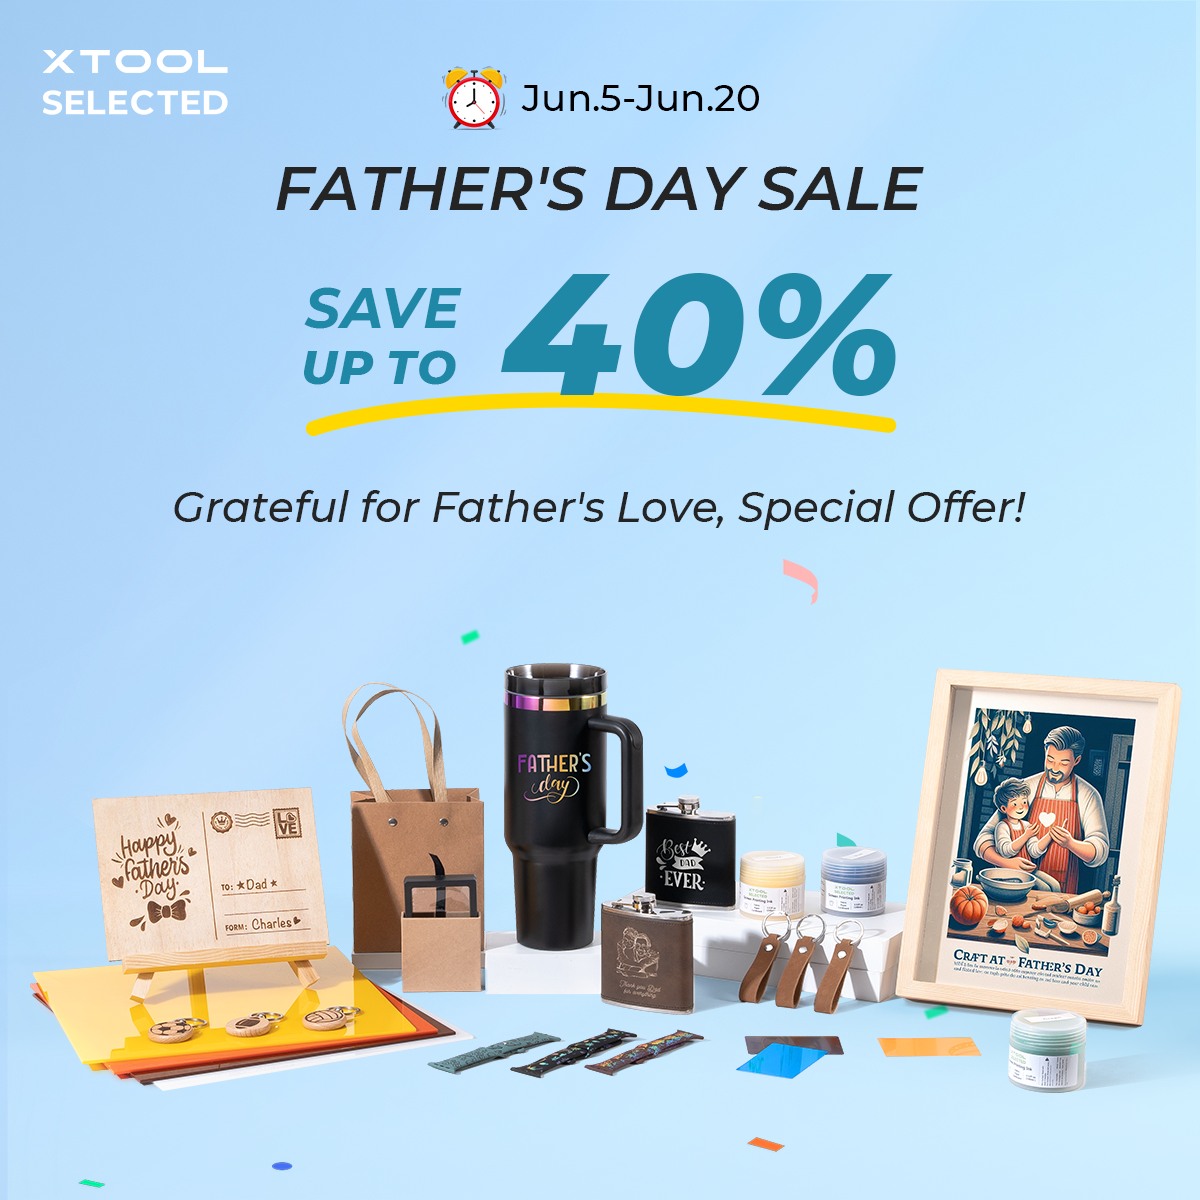 Celebrate Father's Day with xTool Selected!